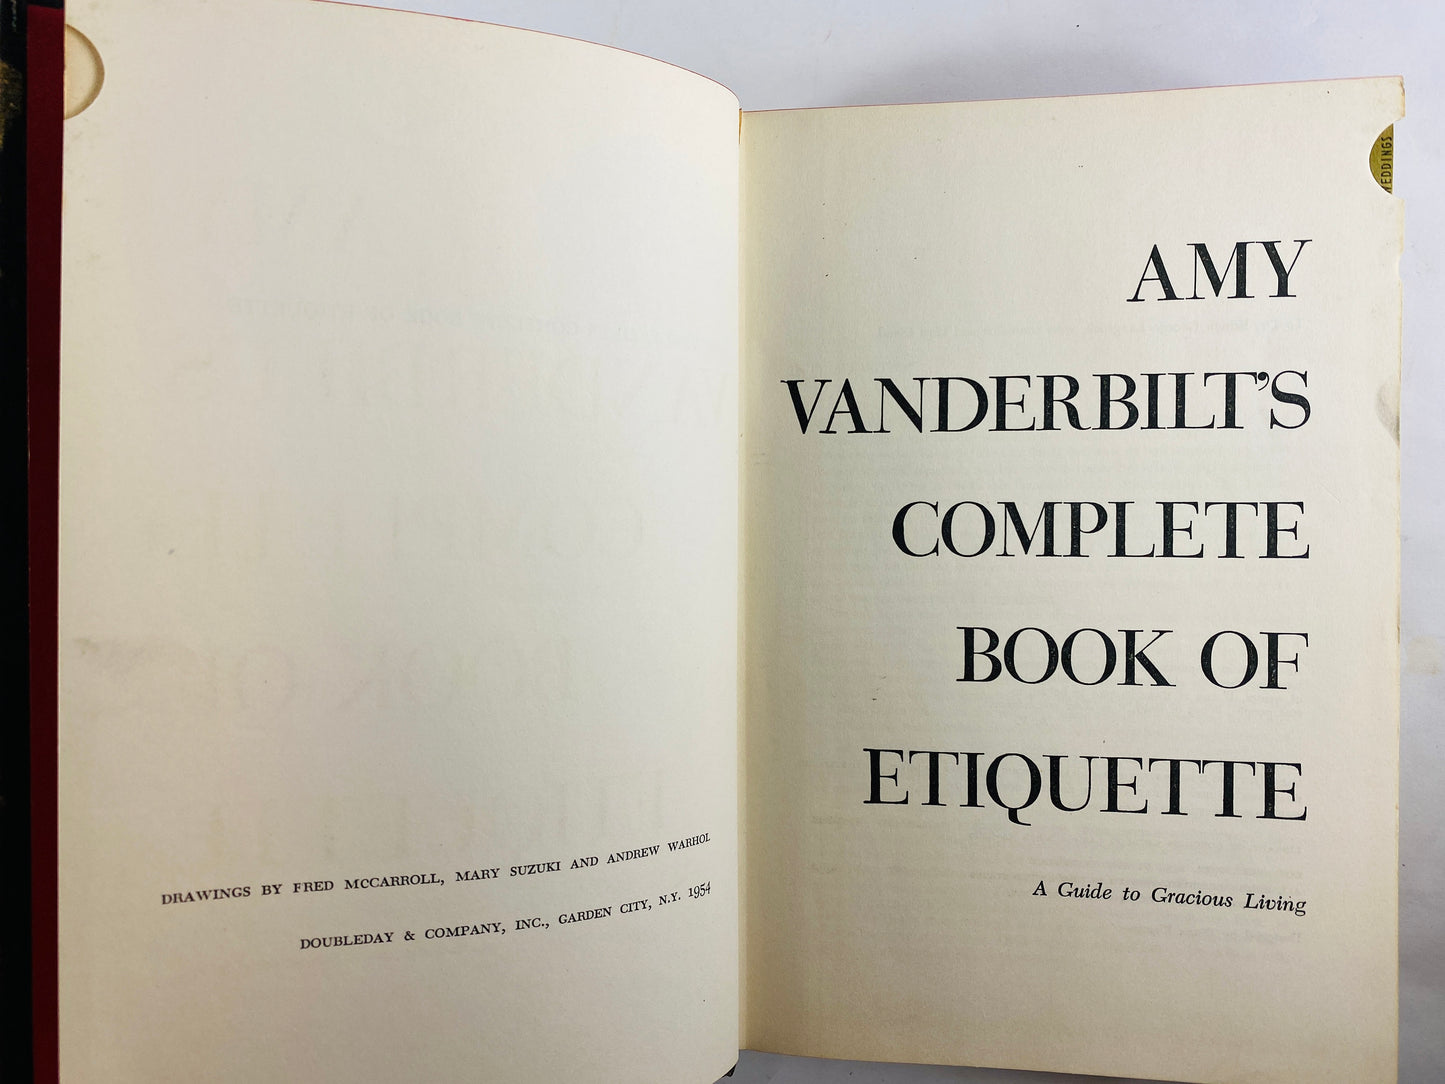 Andy Warhol illustrated! Amy Vanderbilt's Complete Book of Etiquette FIRST Edition SIGNED by Amy Vanderbilt! Vintage book circa 1954